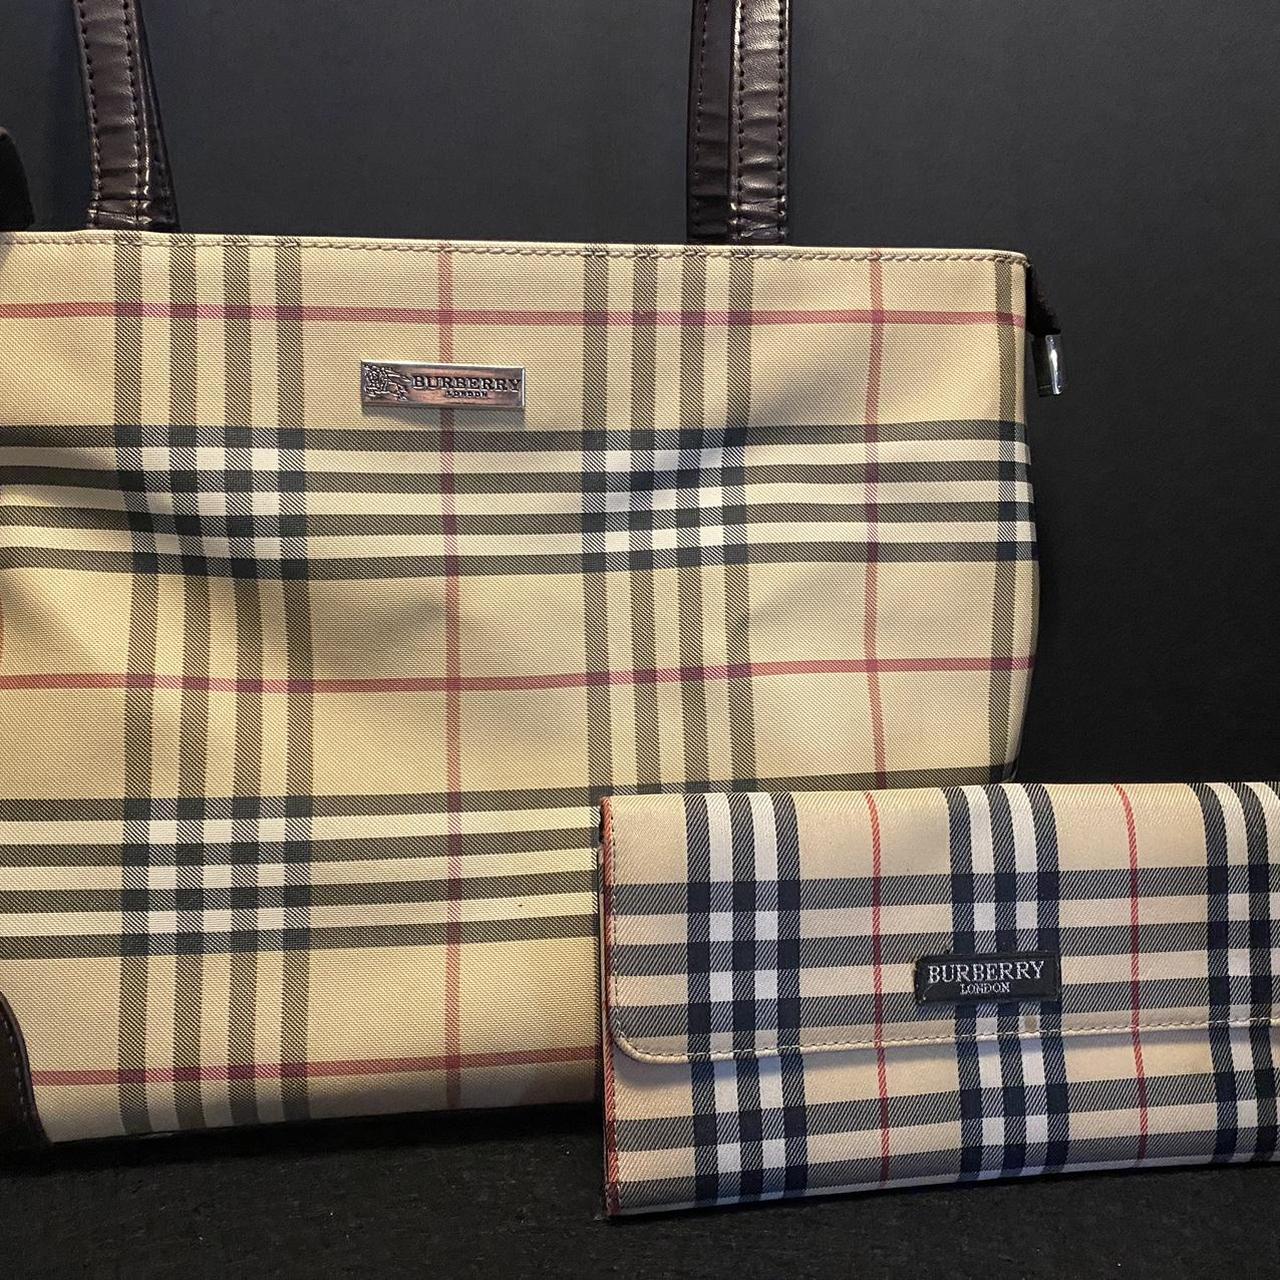 Bag and wallet Burberry style - Depop